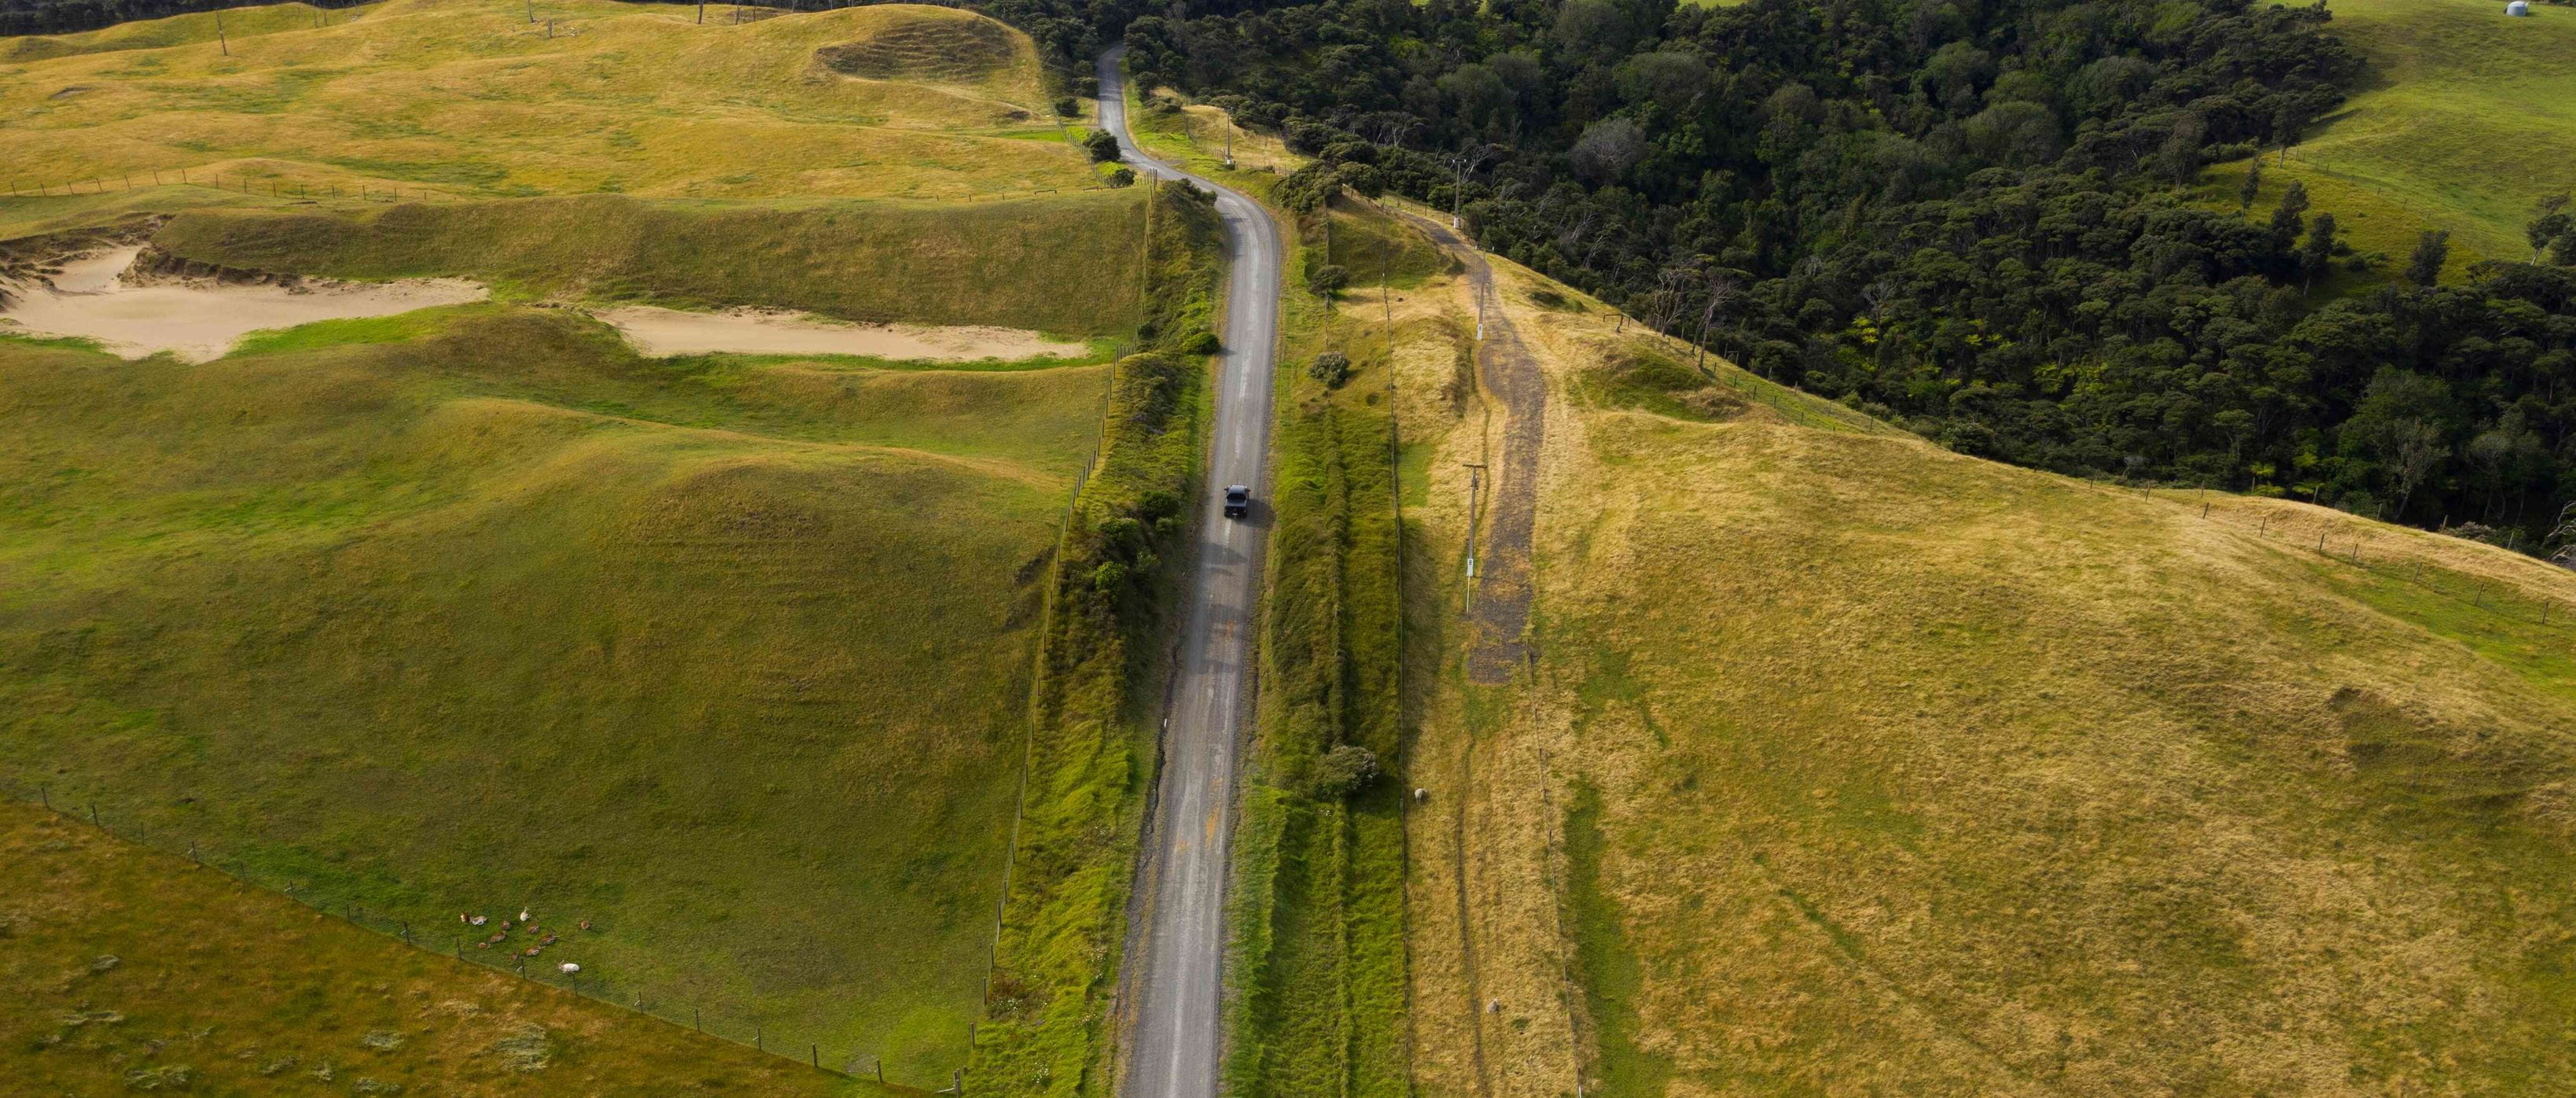 Aerial shot of a rural road passing through the greenery